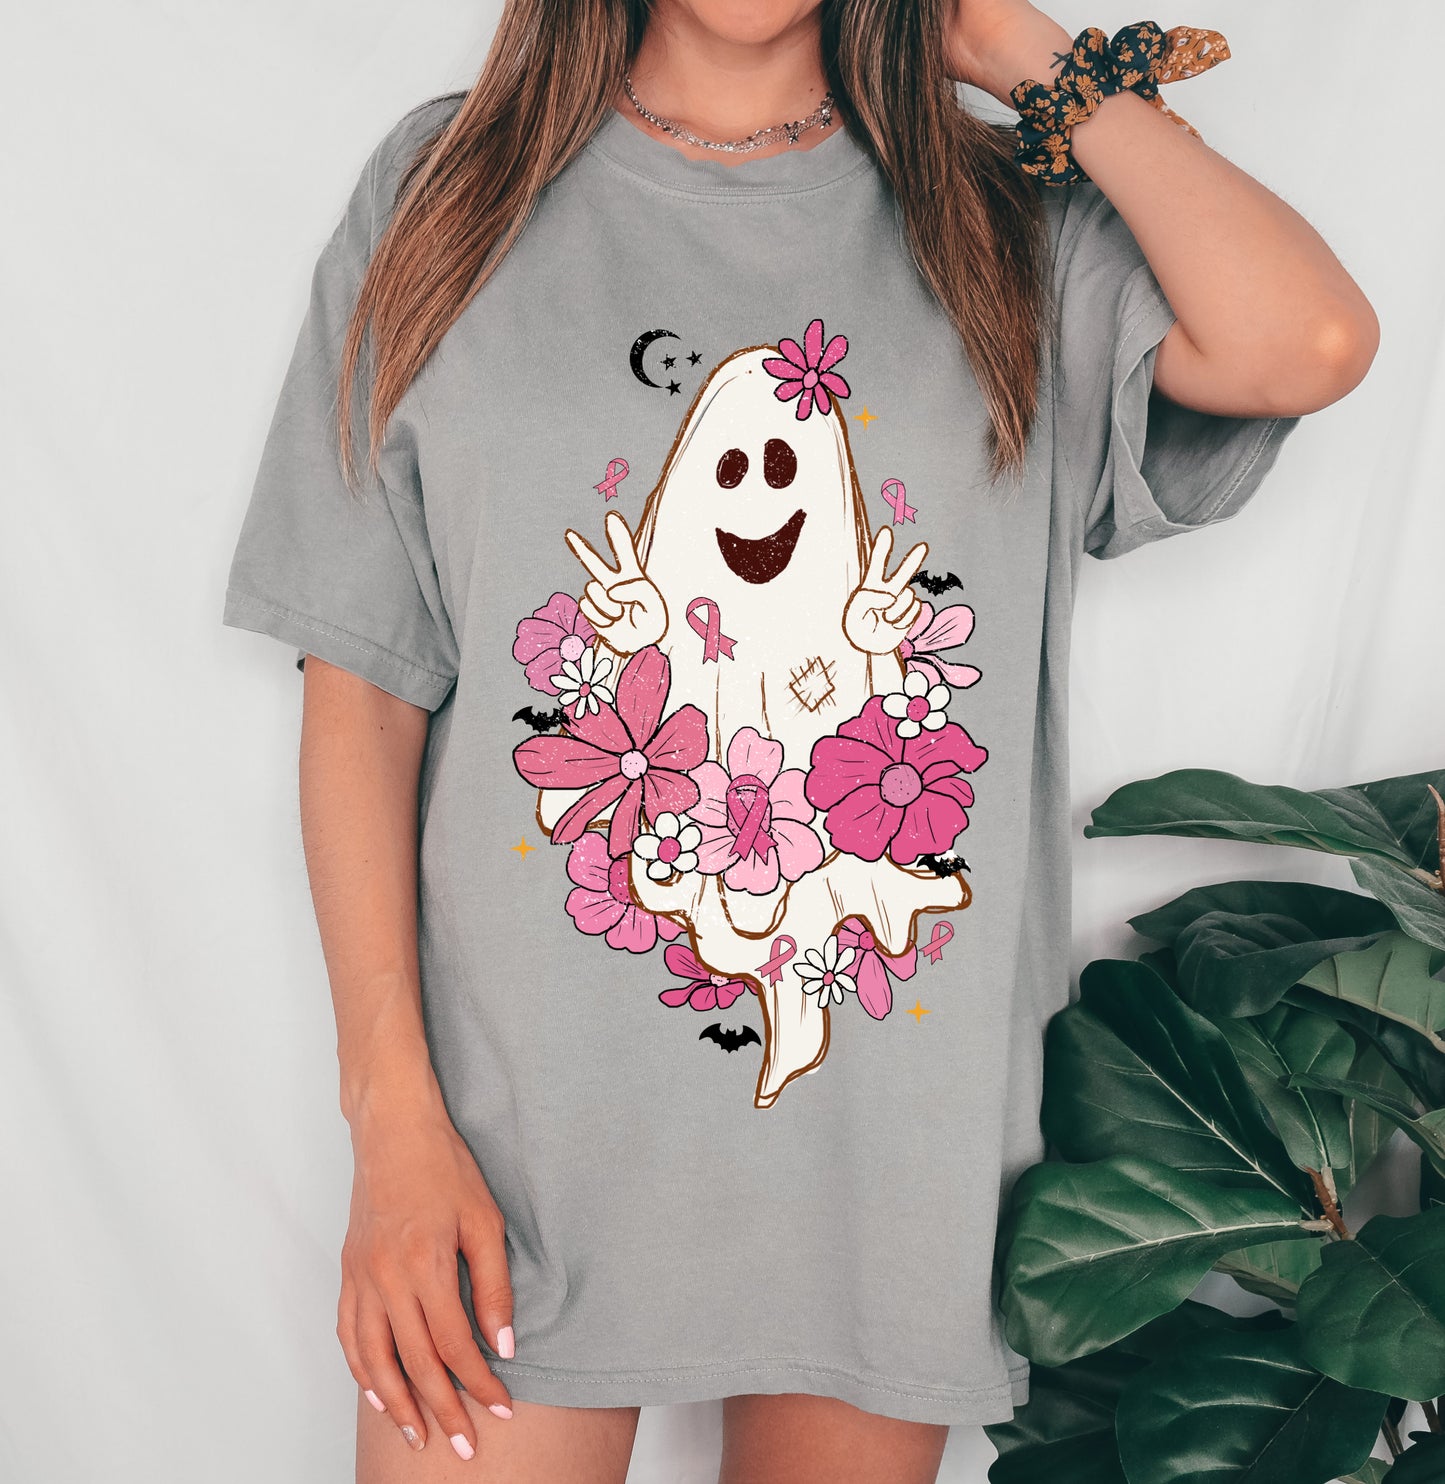 Comfort Colors Breast Cancer Awareness Tee / Youth and Adult Sizes/ Pink Ghost Shirt